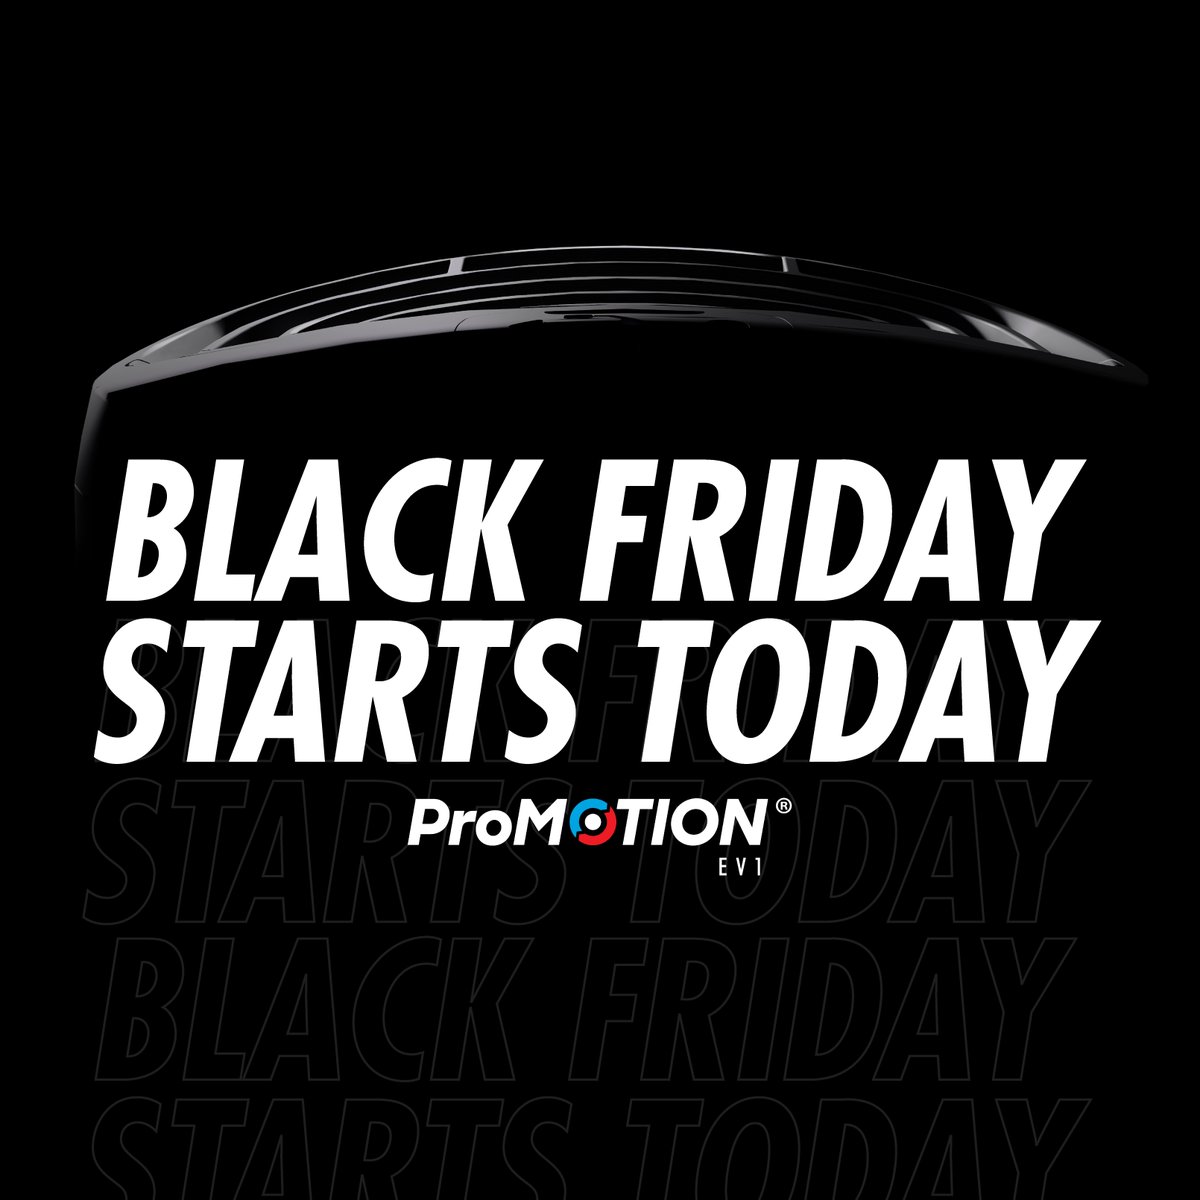 It's here 💥 Our Black Friday deal starts today! 🖤 Get your ProMOTION EV1 Elite Package for £2,730+vat Saving over £750 off the usual purchase price! 🛒 Use code BLKFRI23 at the checkout. Offer is only applicable to online sales #ProMOTIONEV1 #blackfriday #blackfridaydeals